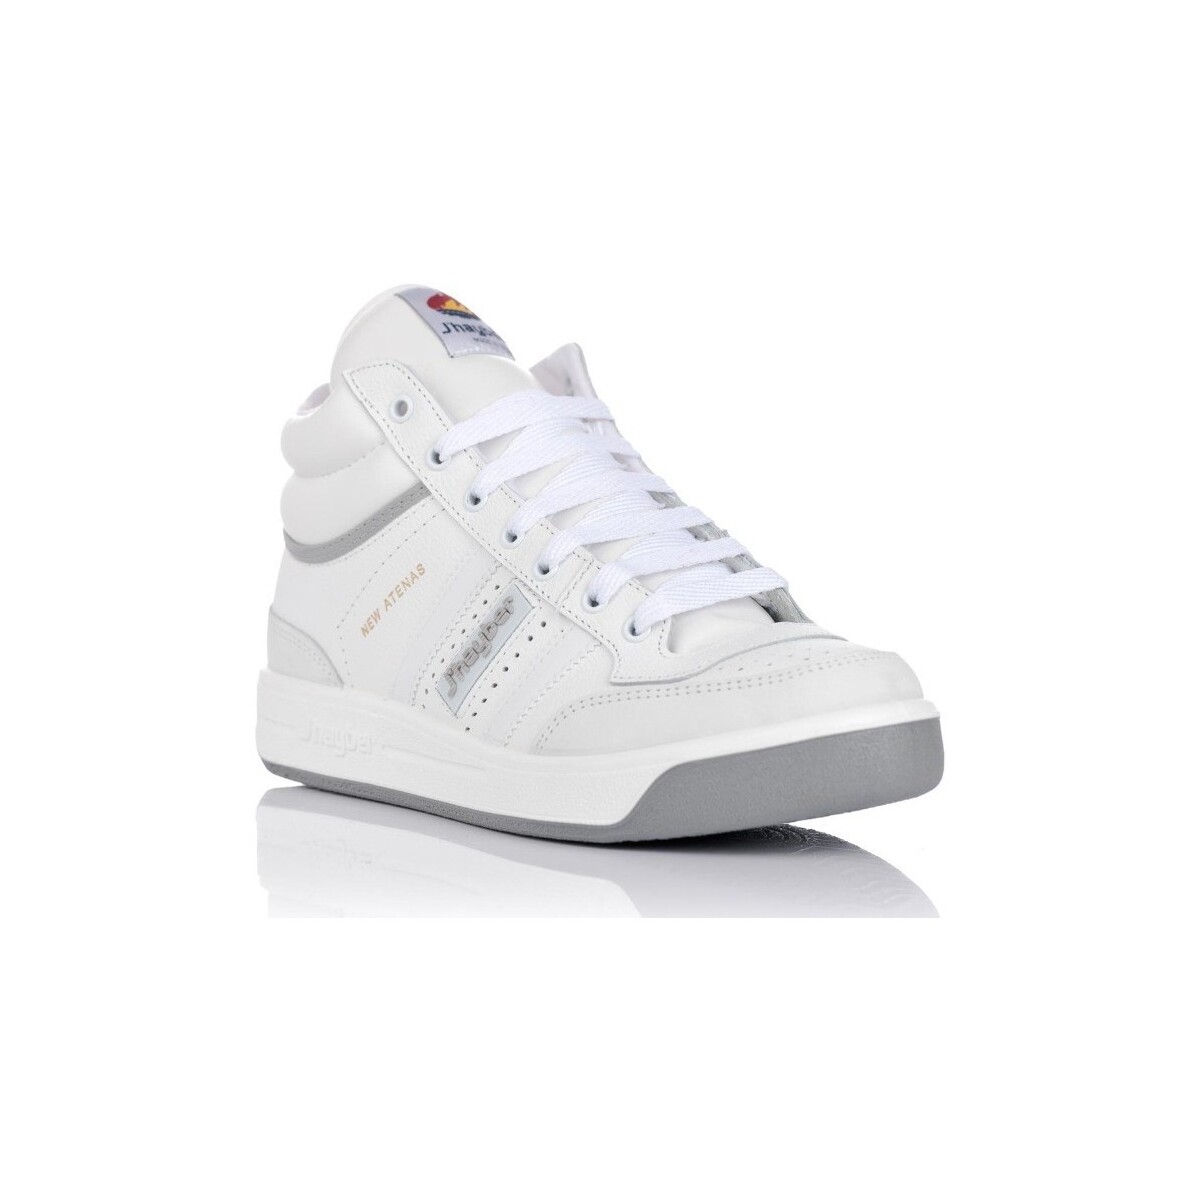 Chaussures Homme Basketball J´hayber 33048 850 Blanc